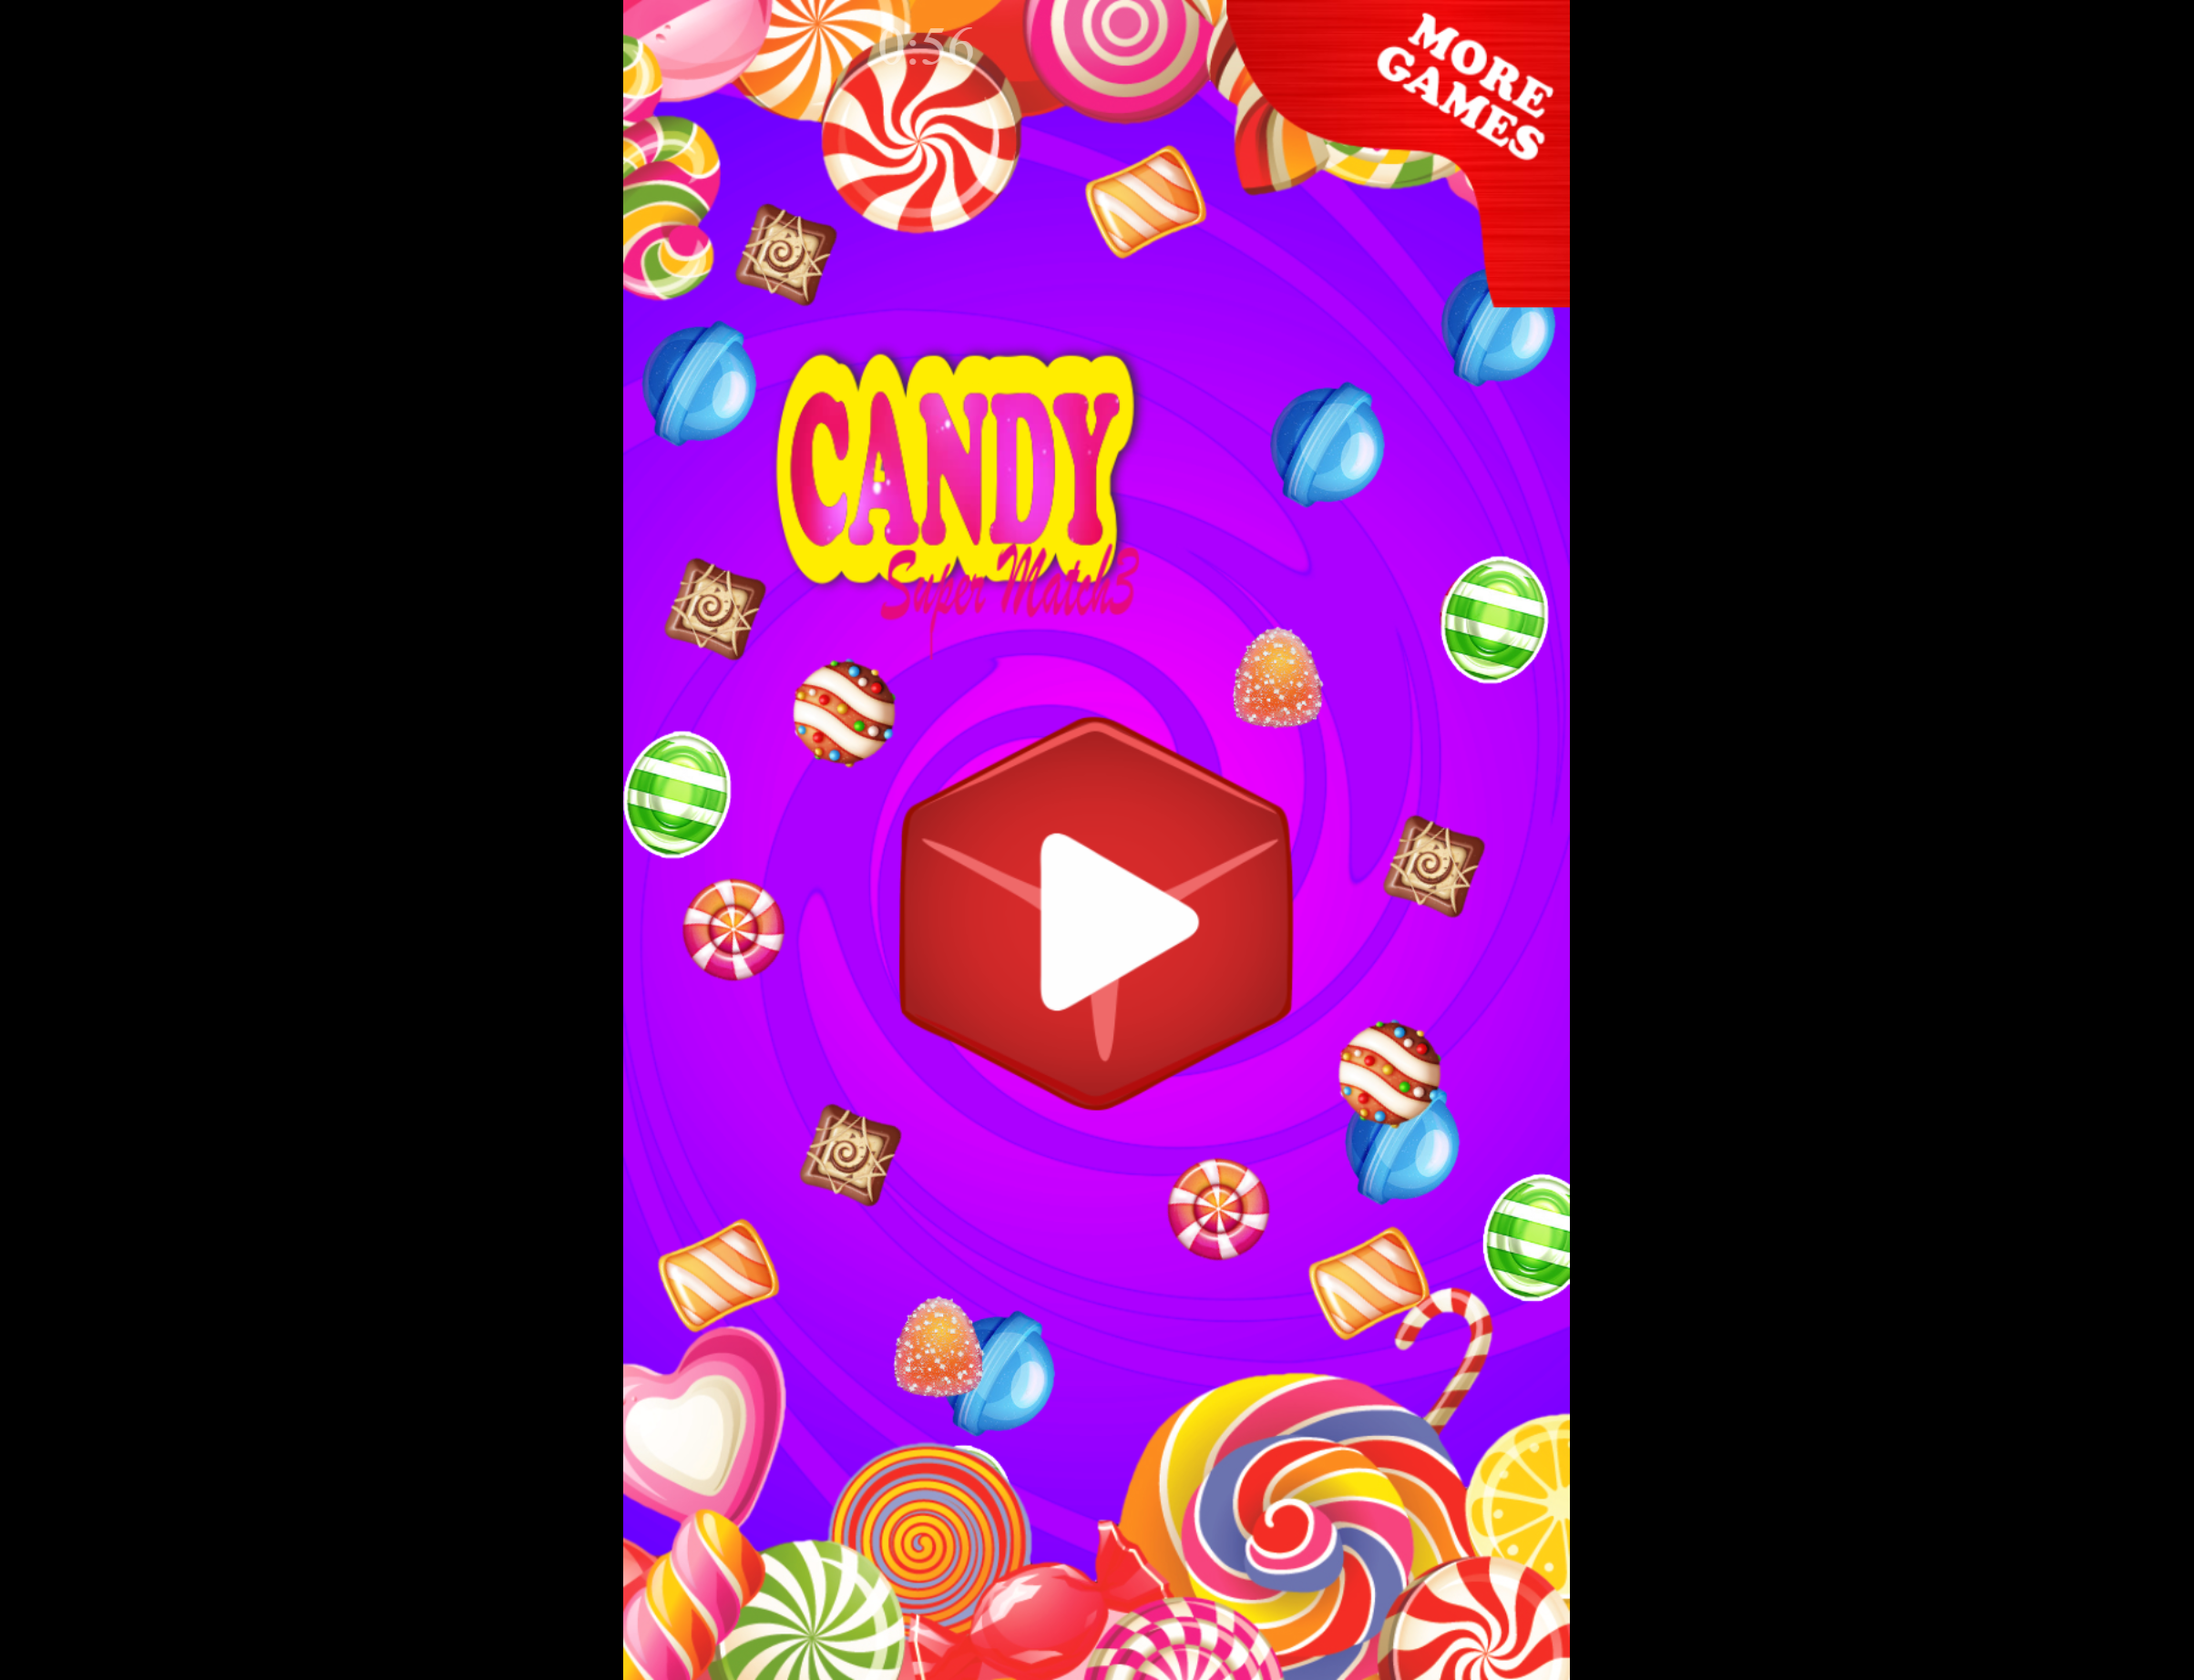 Candy game – Play an Buy on Amandy games